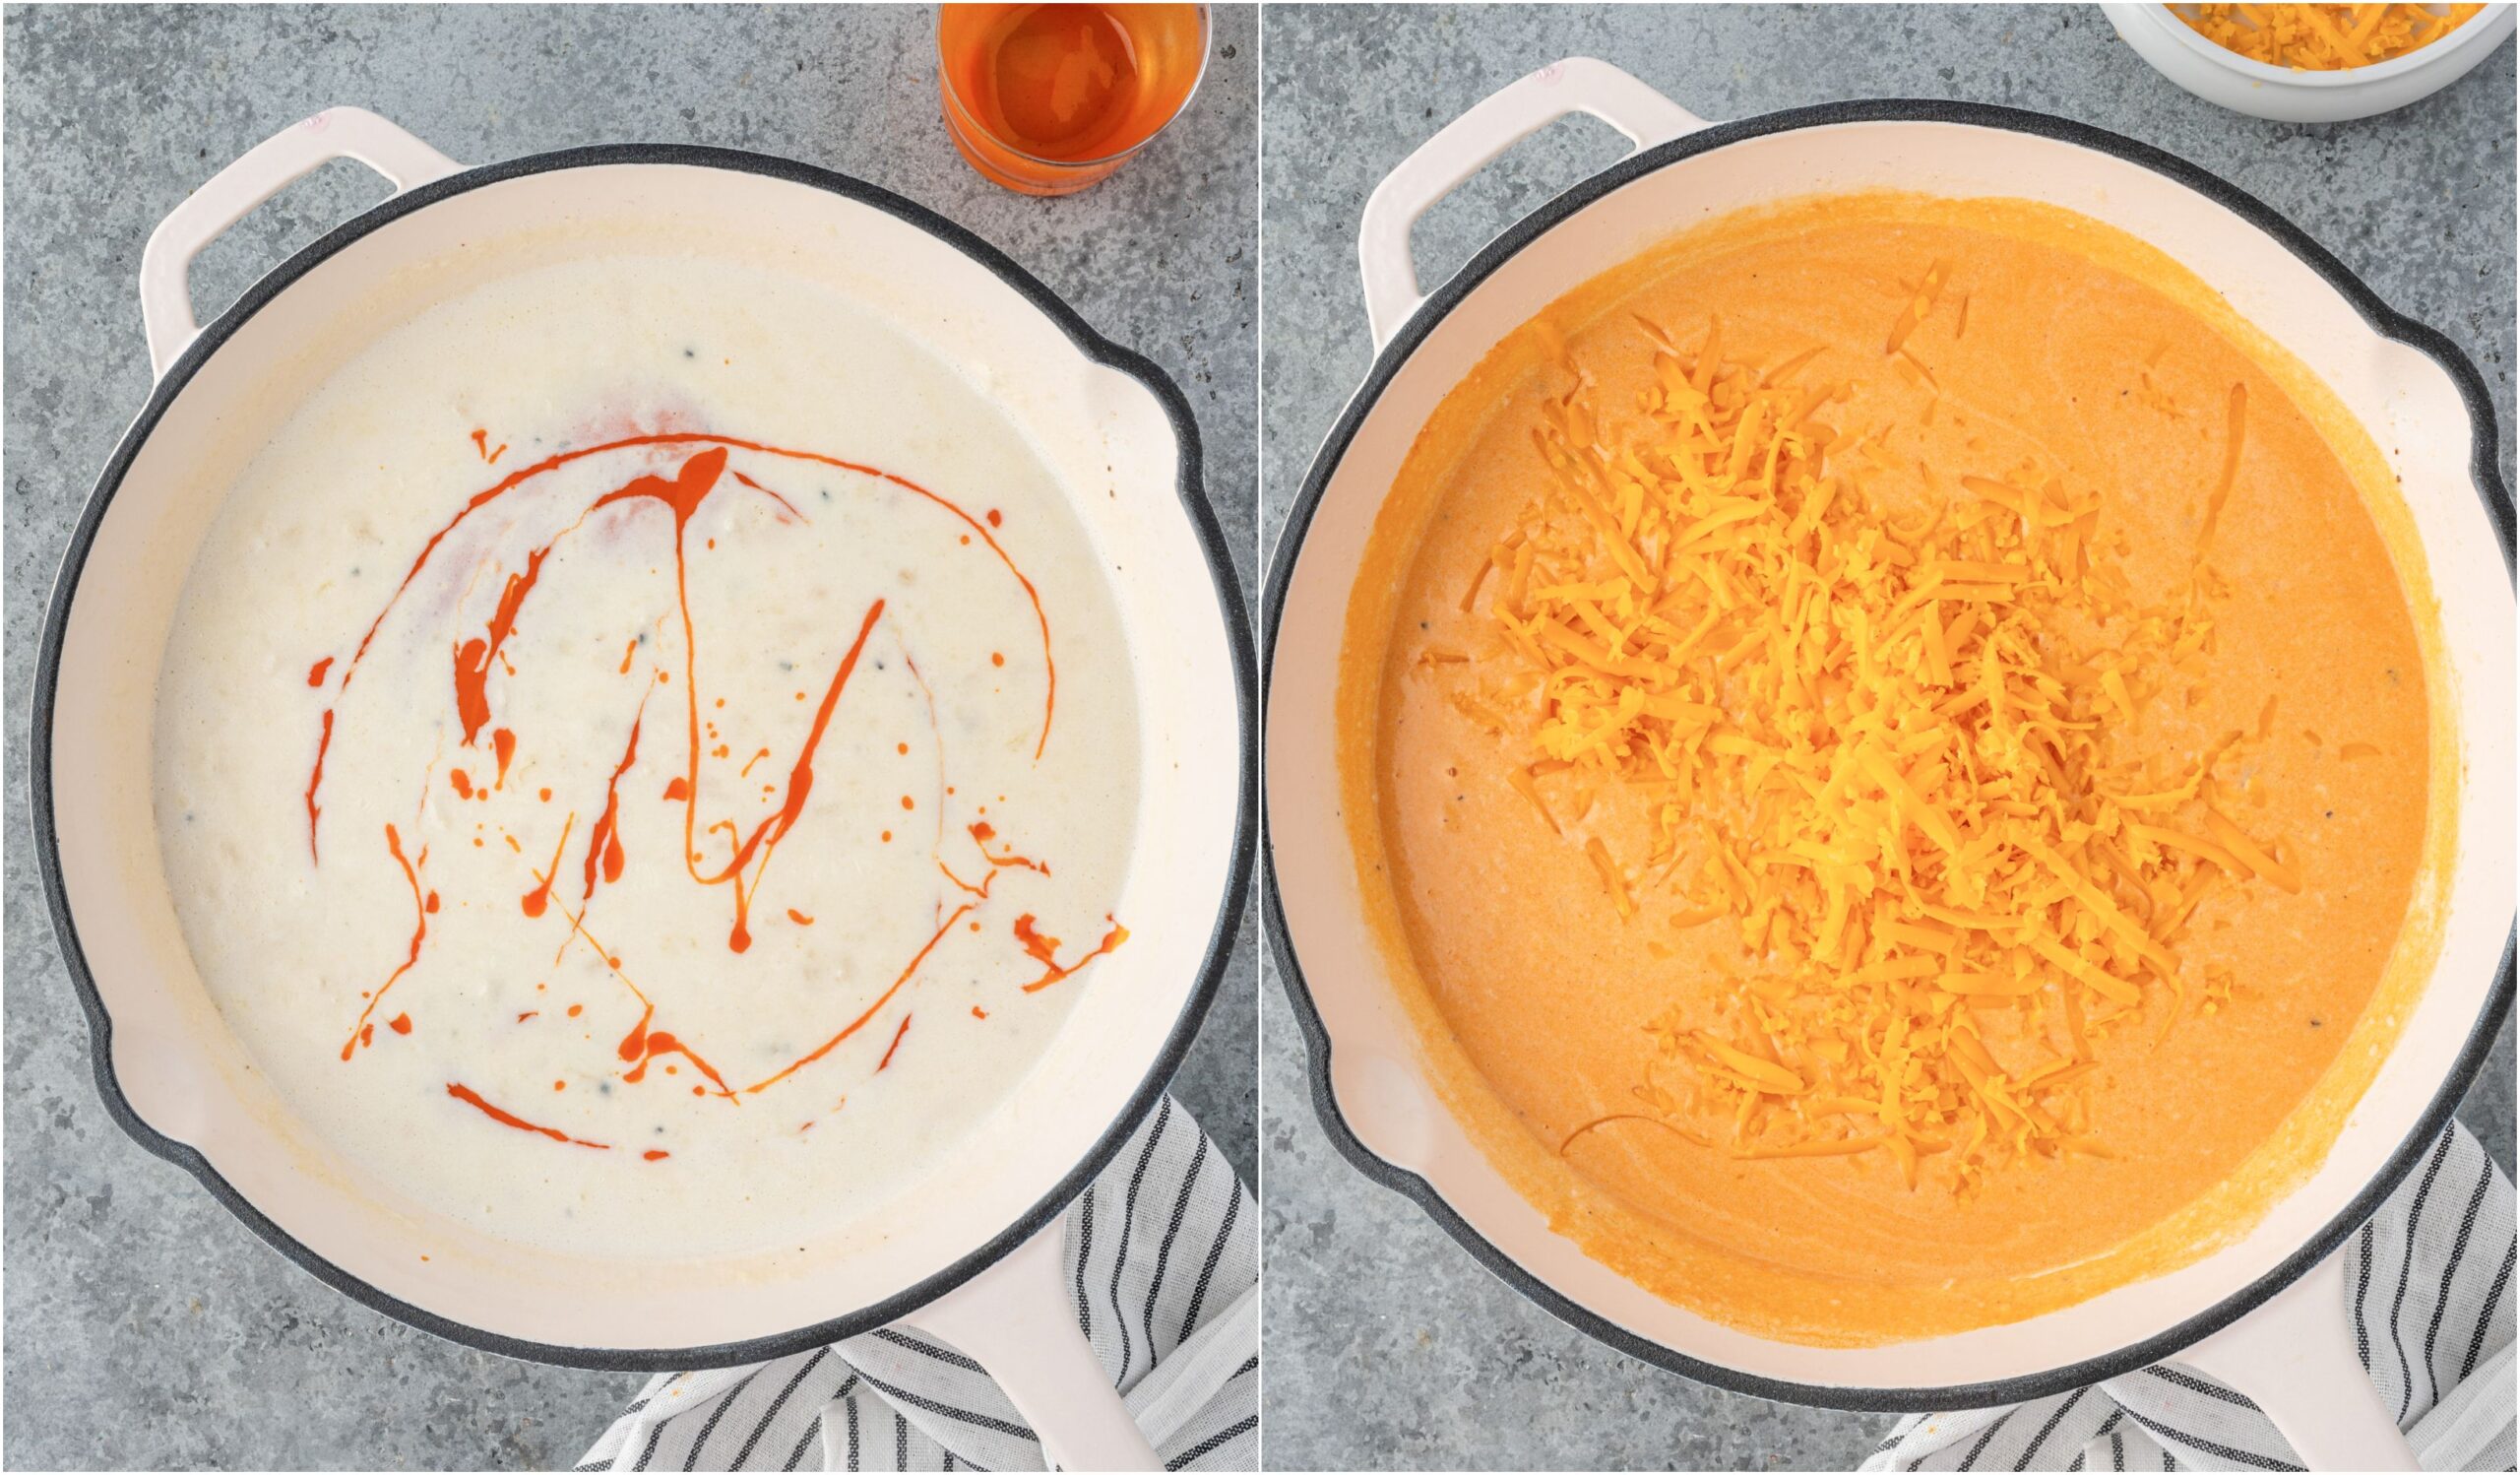 Making the cheese sauce with cheddar cheese and buffalo sauce.